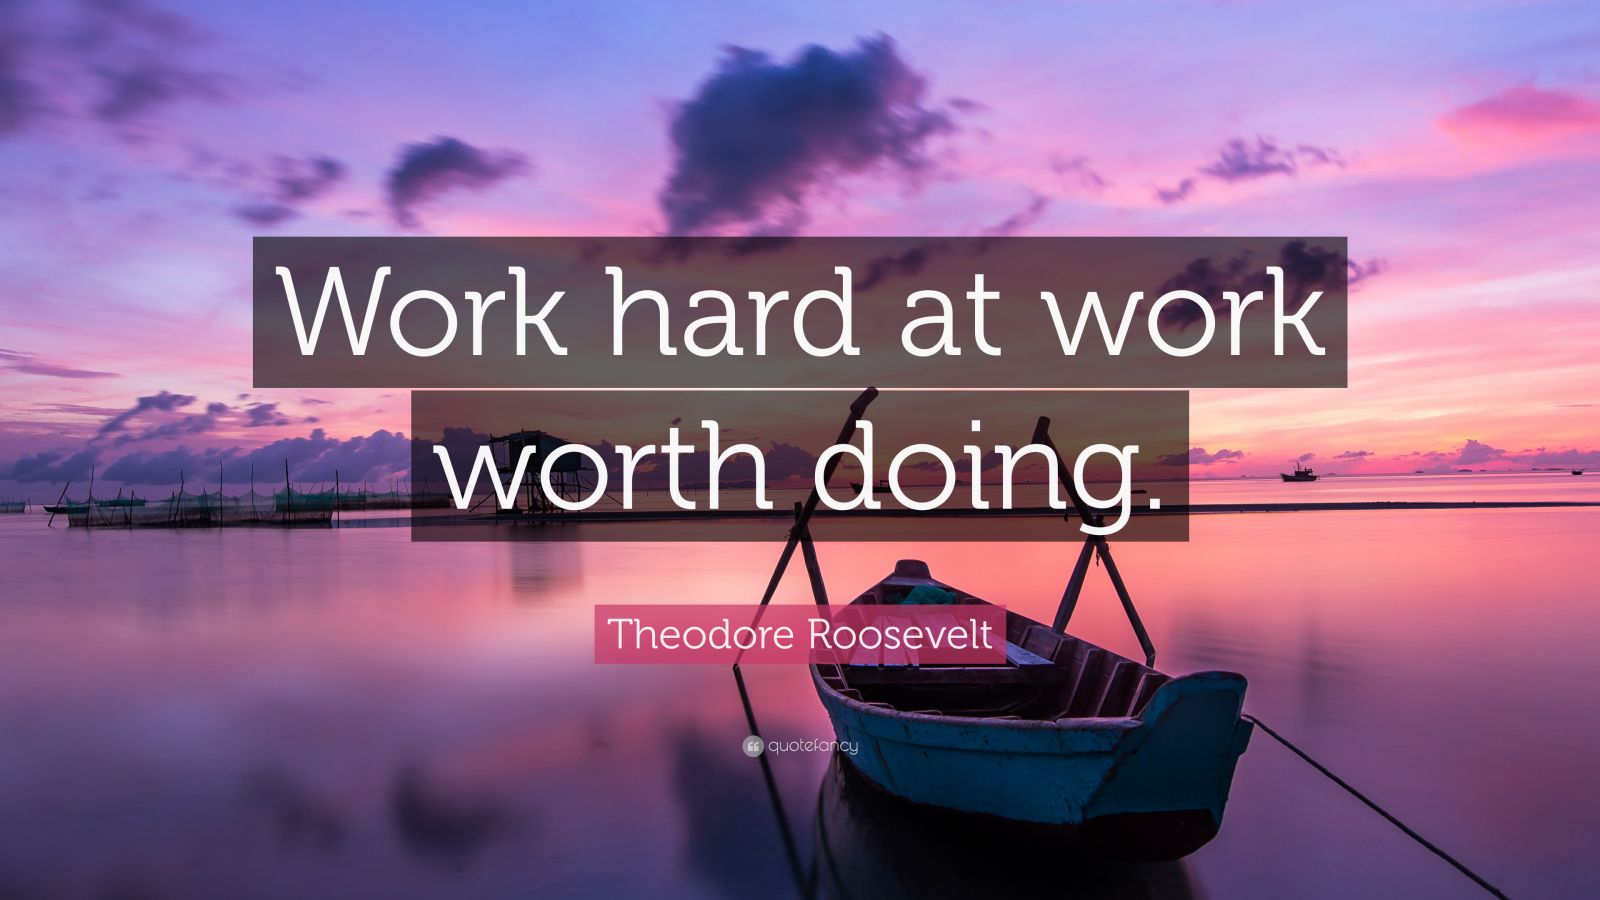 Theodore Roosevelt Quote: “Work hard at work worth doing.” (12 ...